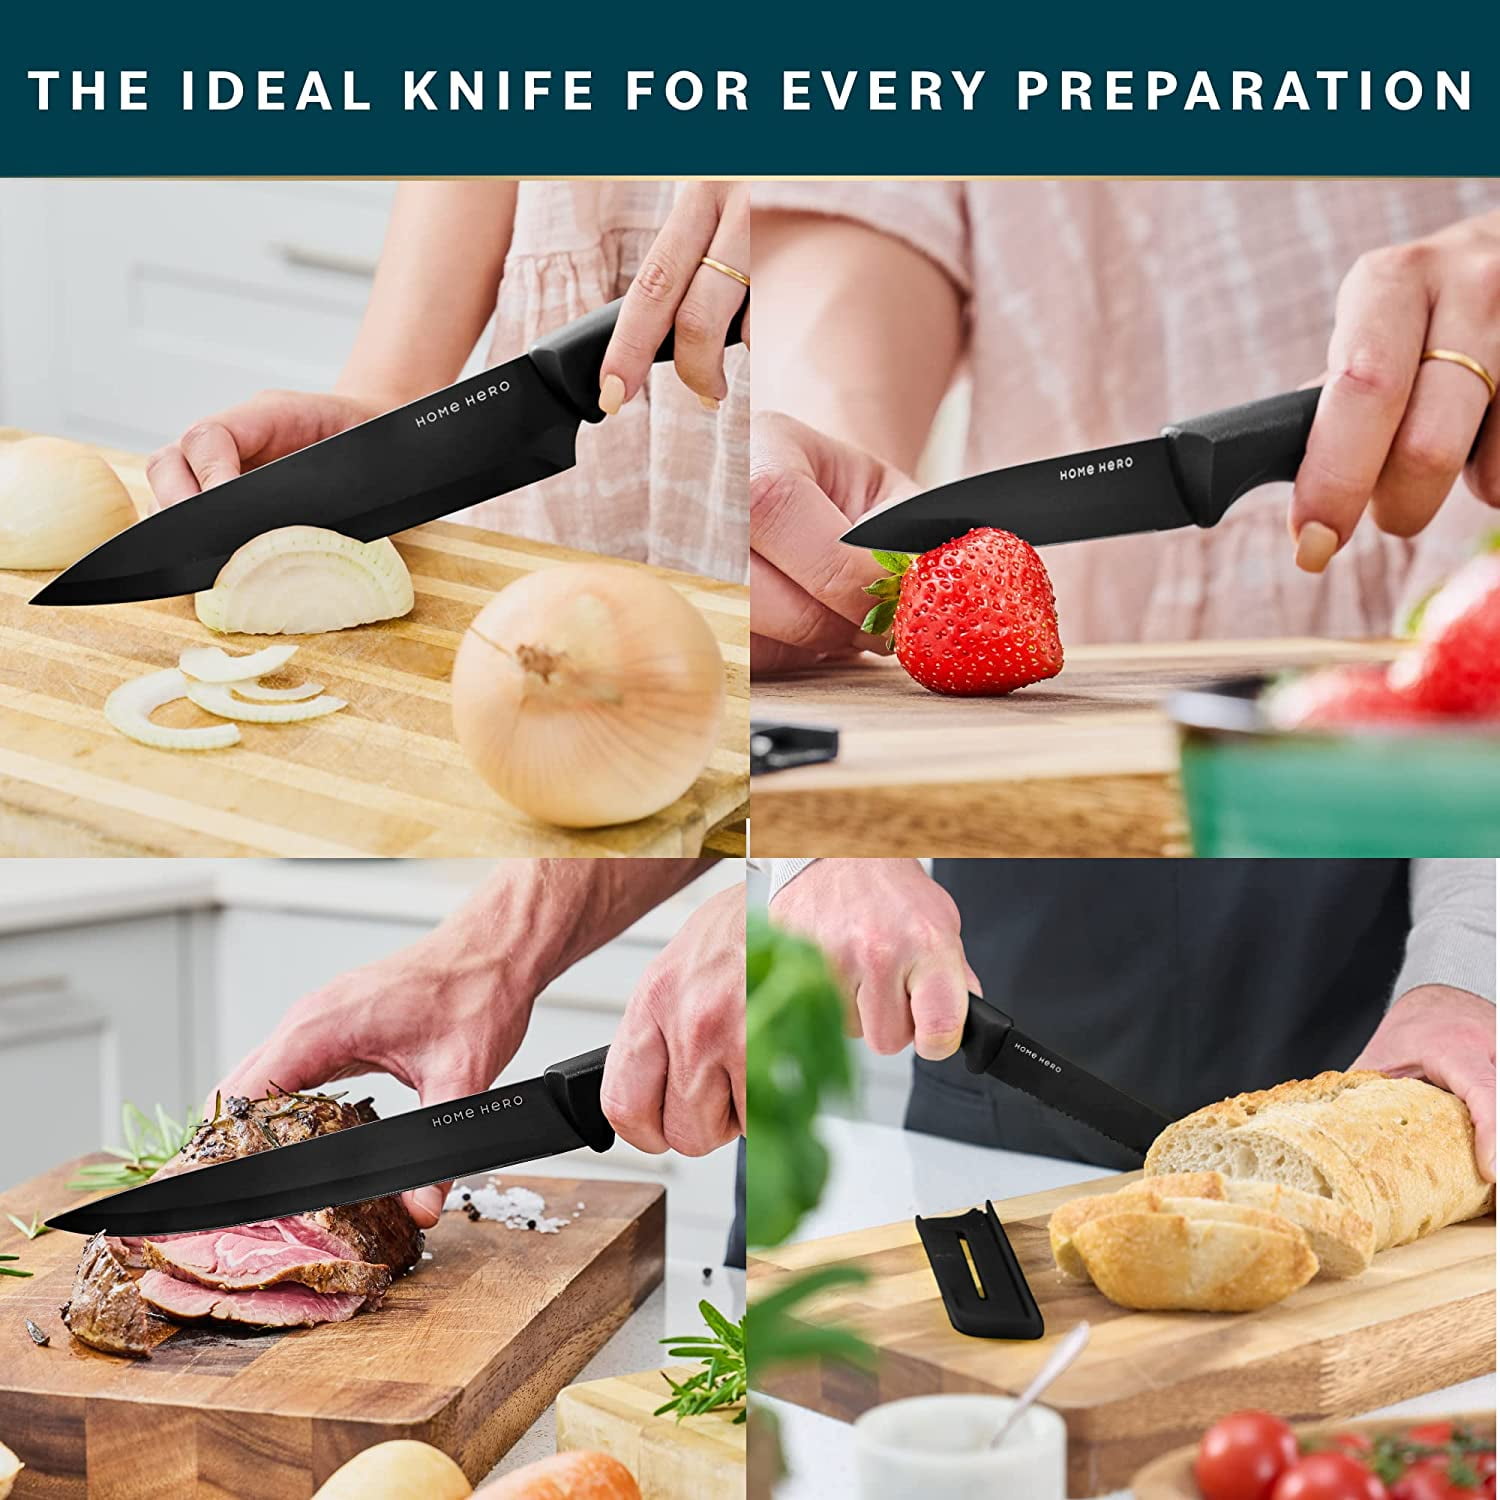 This knife set is perfect for your favorite home cook